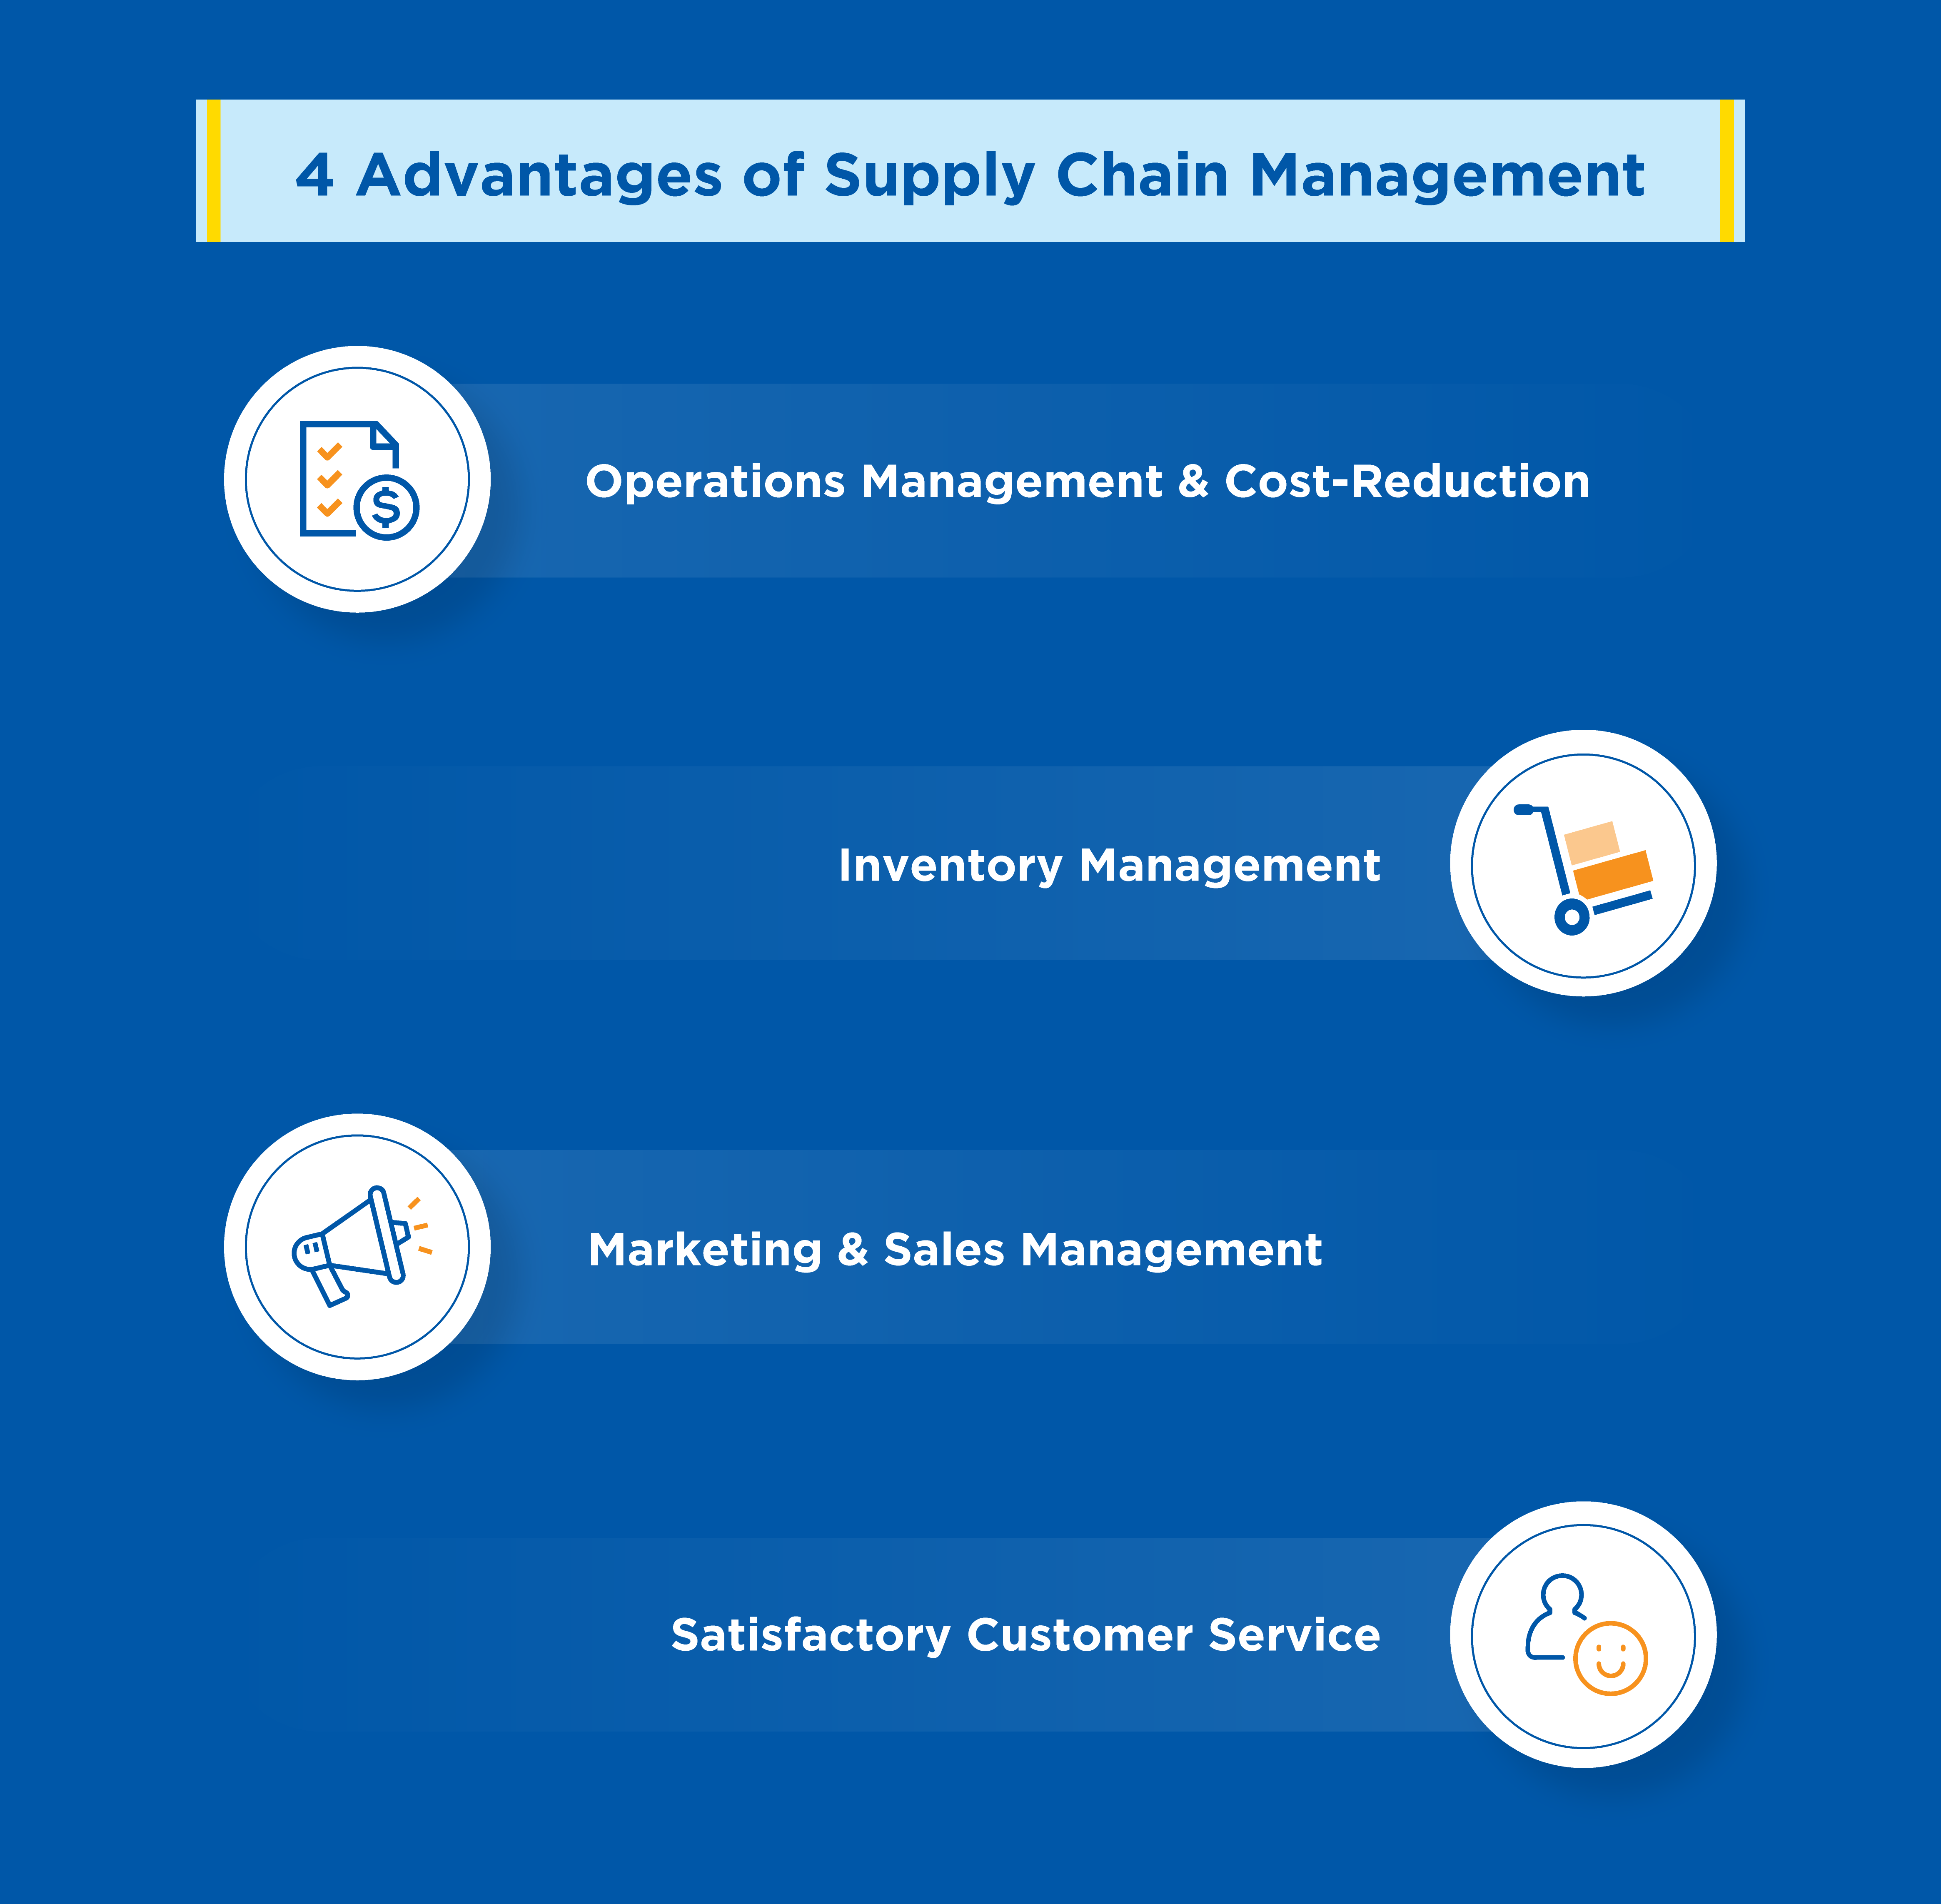 Advantages of Supply Chain Management